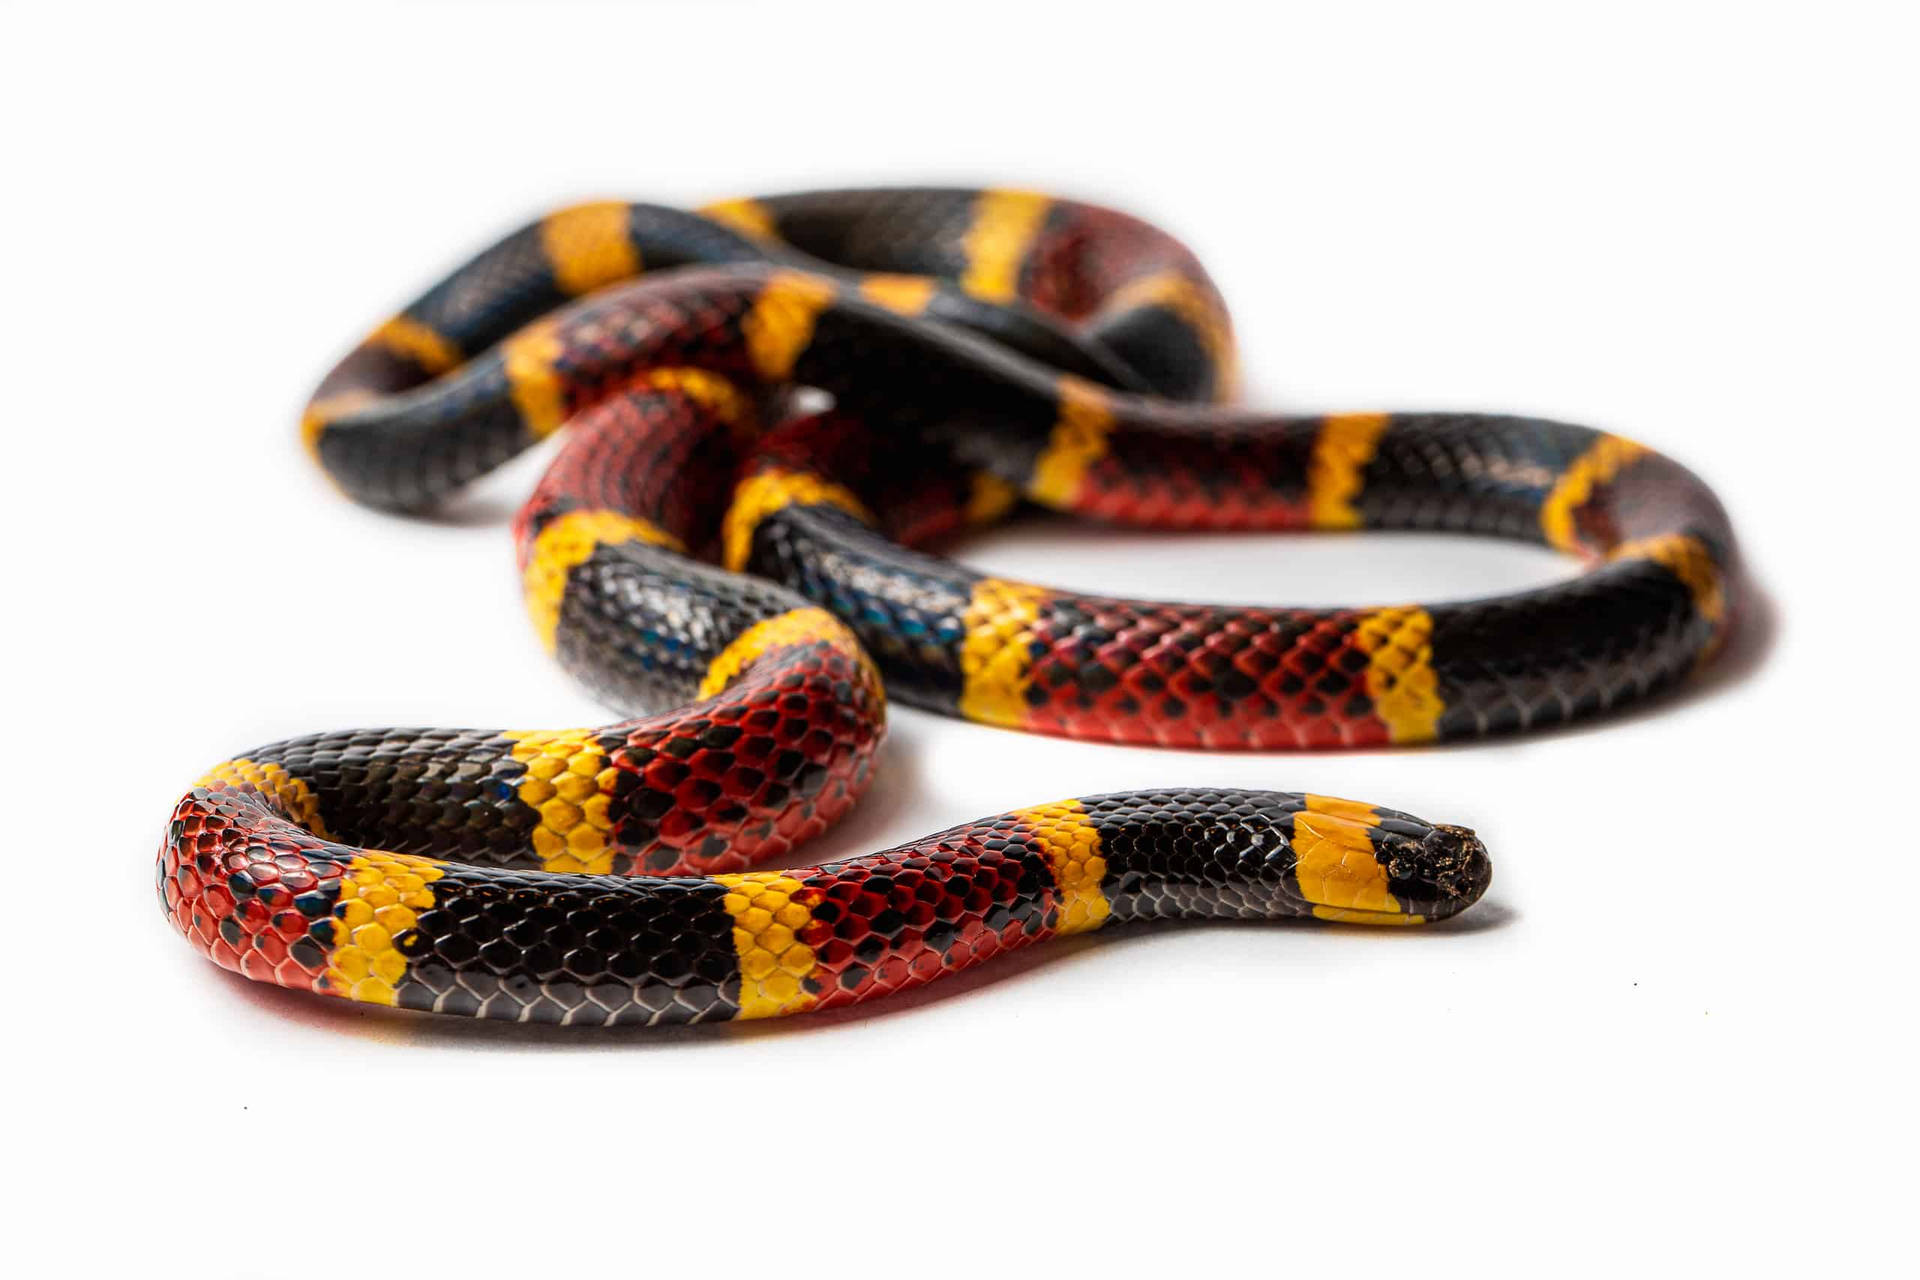 Coral Snake Pictures Wallpaper